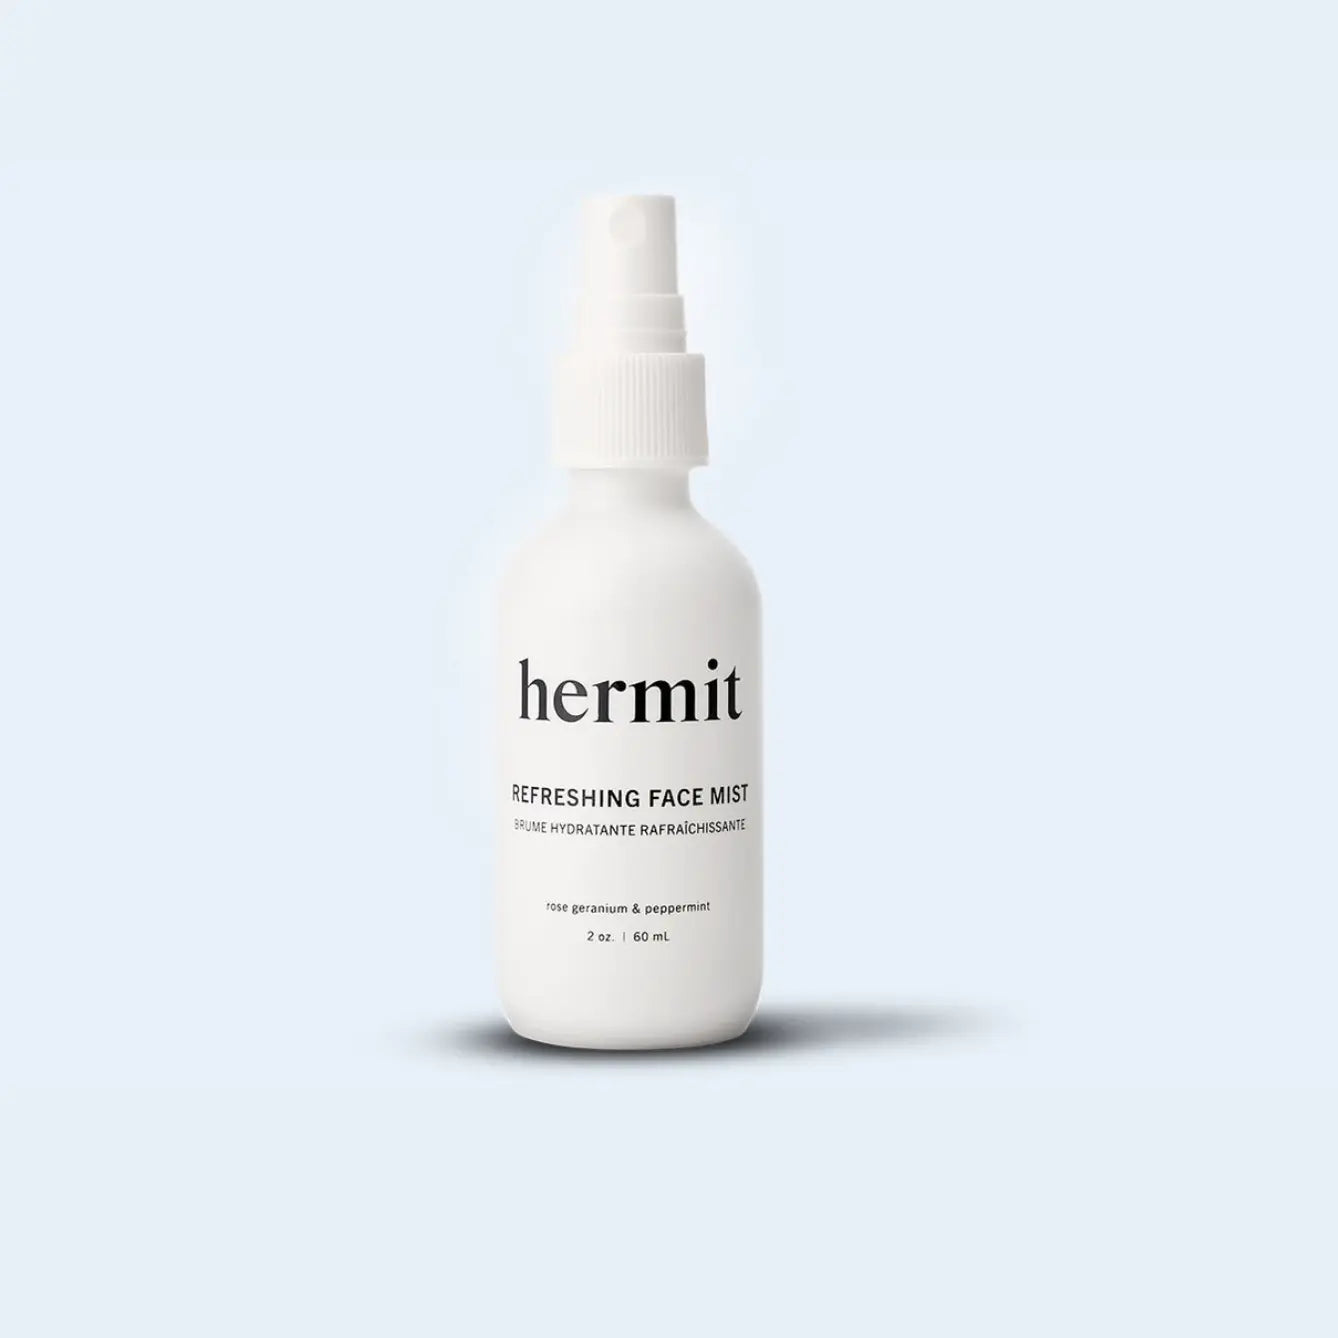 Hermit Refreshing Face Mist - Home Smith